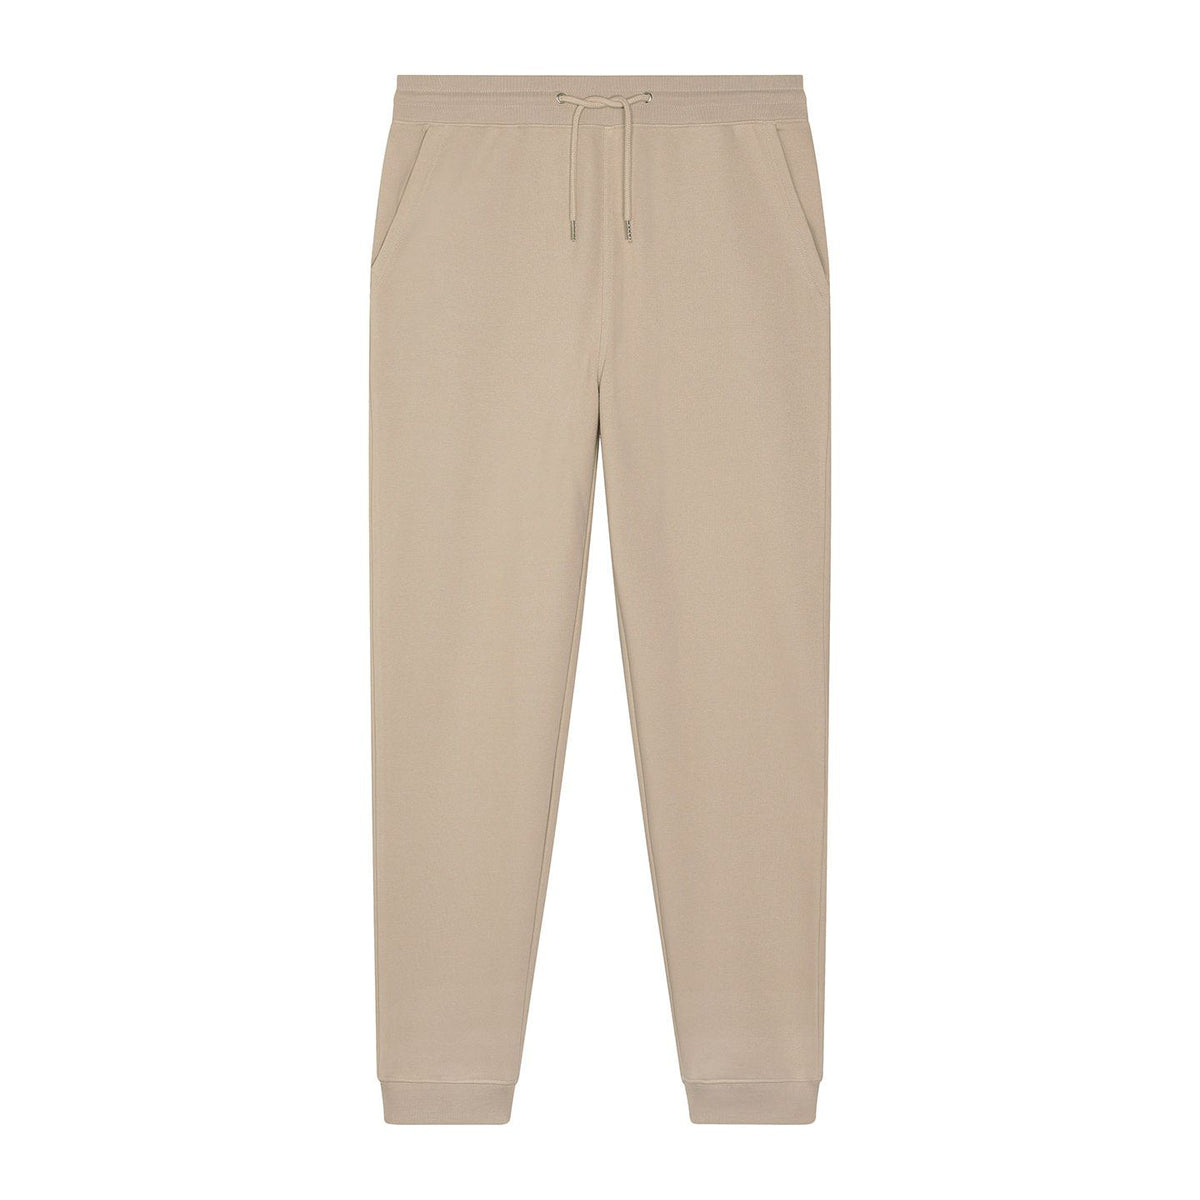 Stanley Mover Jogger Pants